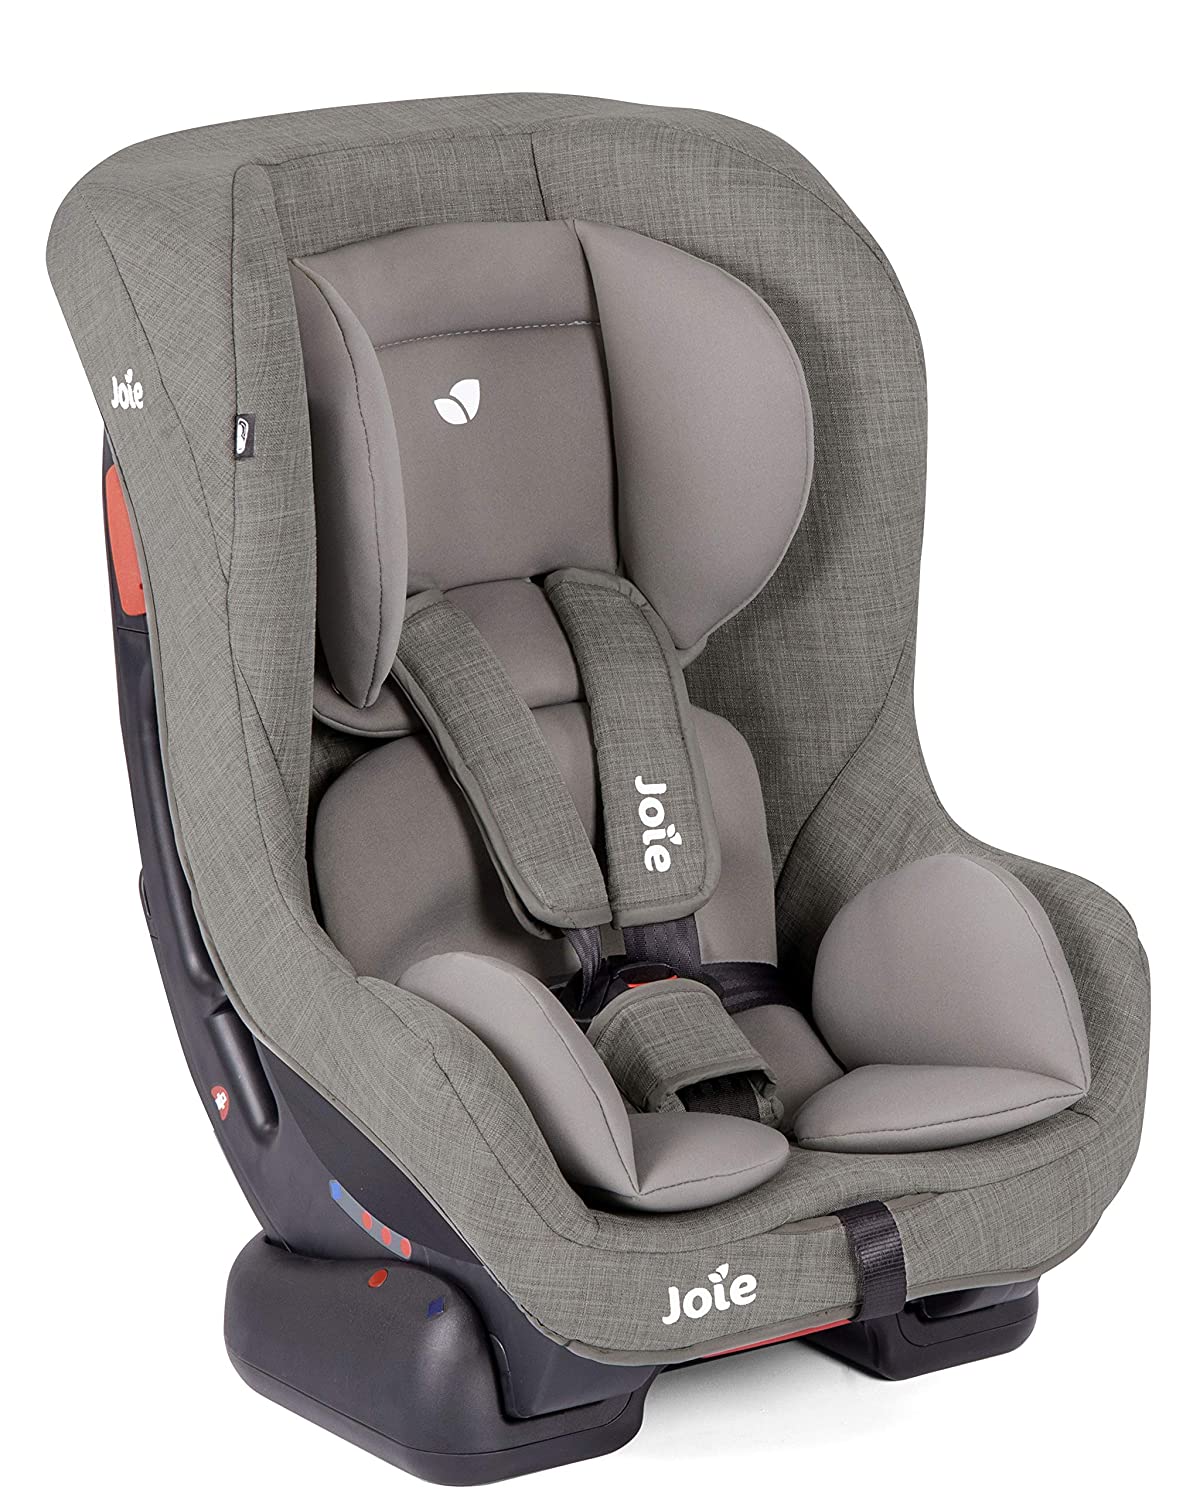 Joie Tilt Foggy Grey Color Baby Carrier || Birth+ to 48months - Toys4All.in